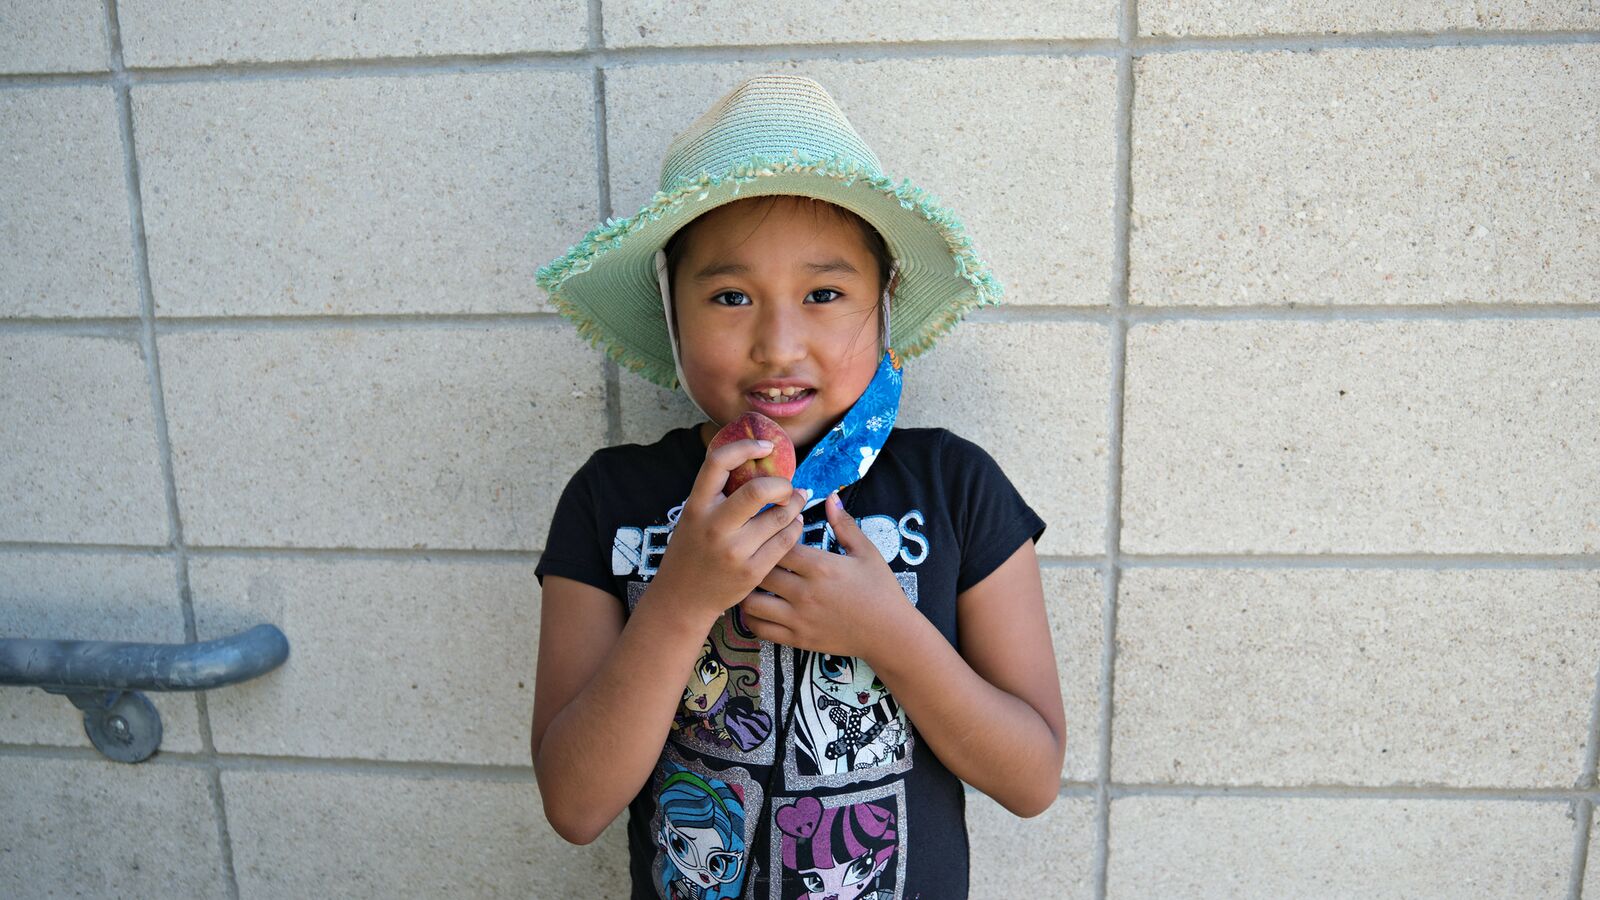 A student at a school supported by the Urban School Food Alliance eats a peach